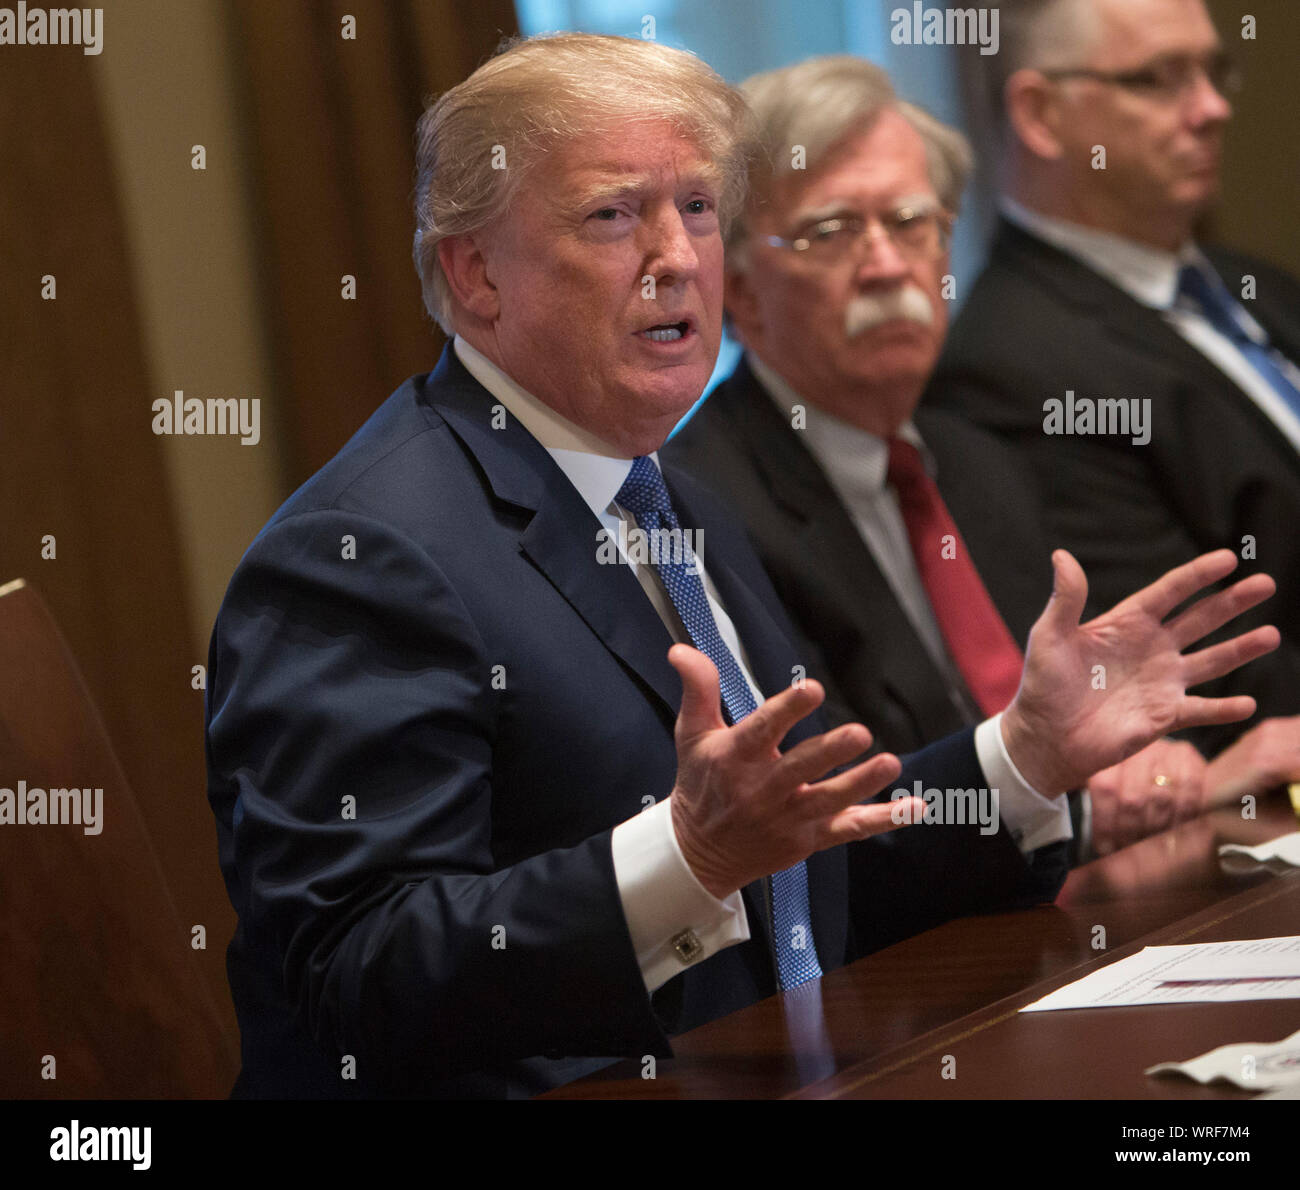 ***FILE PHOTO*** Donald Trump Fires National Security Advisor John Bolton***.  United States President Donald J. Trump makes statements on the ongoing investigation of  election meddling and on the current situation in Syria during a meeting with senior military leadership at The White House in Washington, DC, March 9, 2018. Seated next to Trump is National Security Advisor John Bolton.  Credit: Chris Kleponis / CNP /MediaPunch Stock Photo